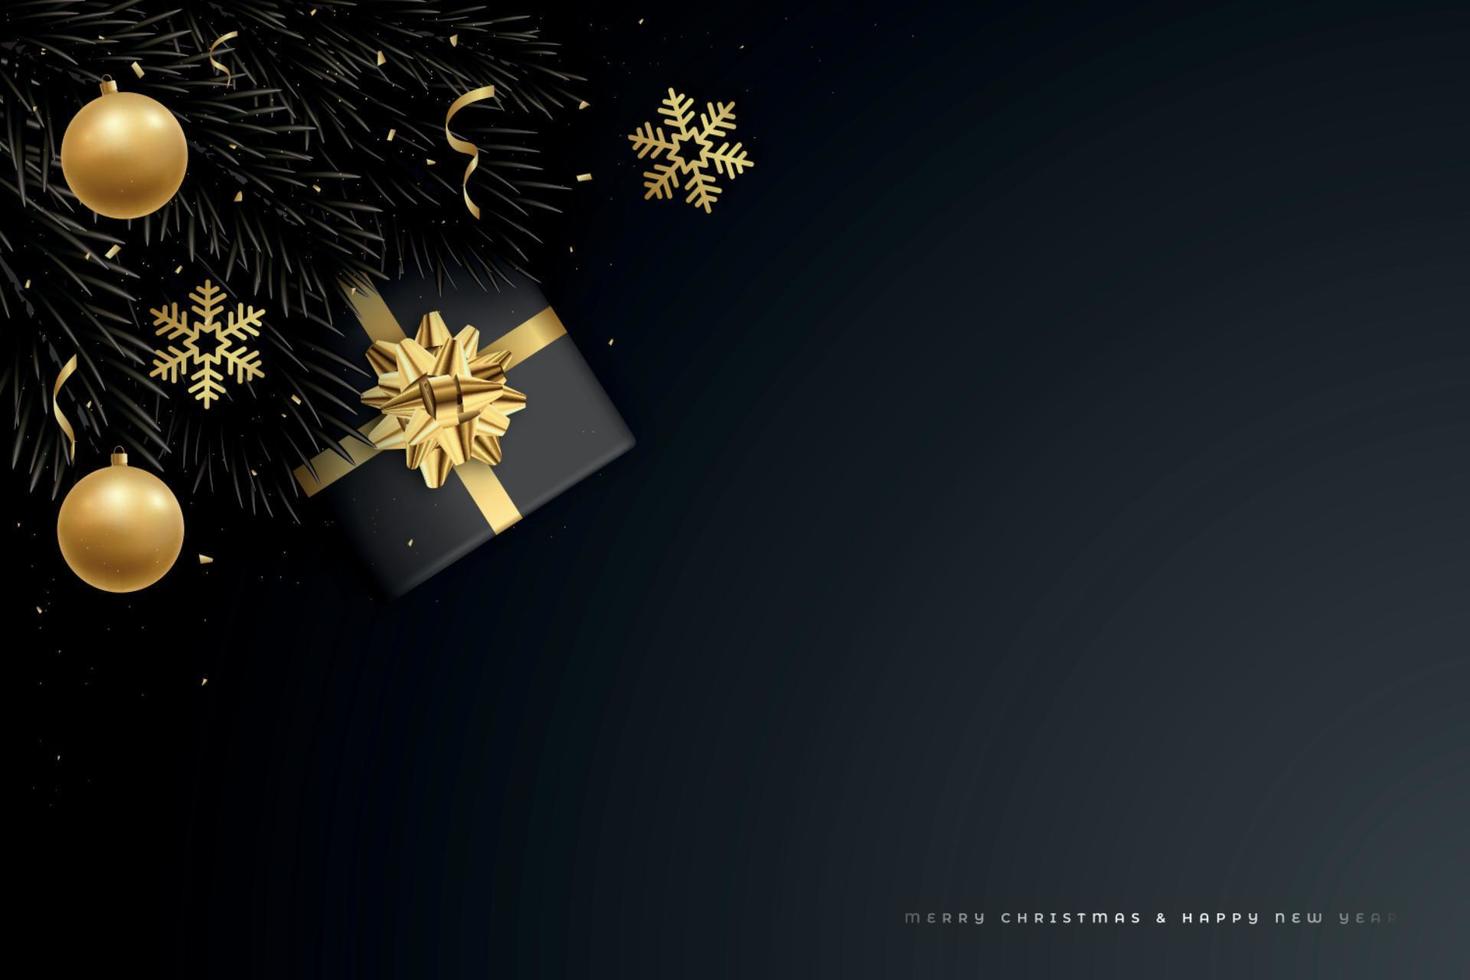 Merry Christmas and Happy New Year vector banner.